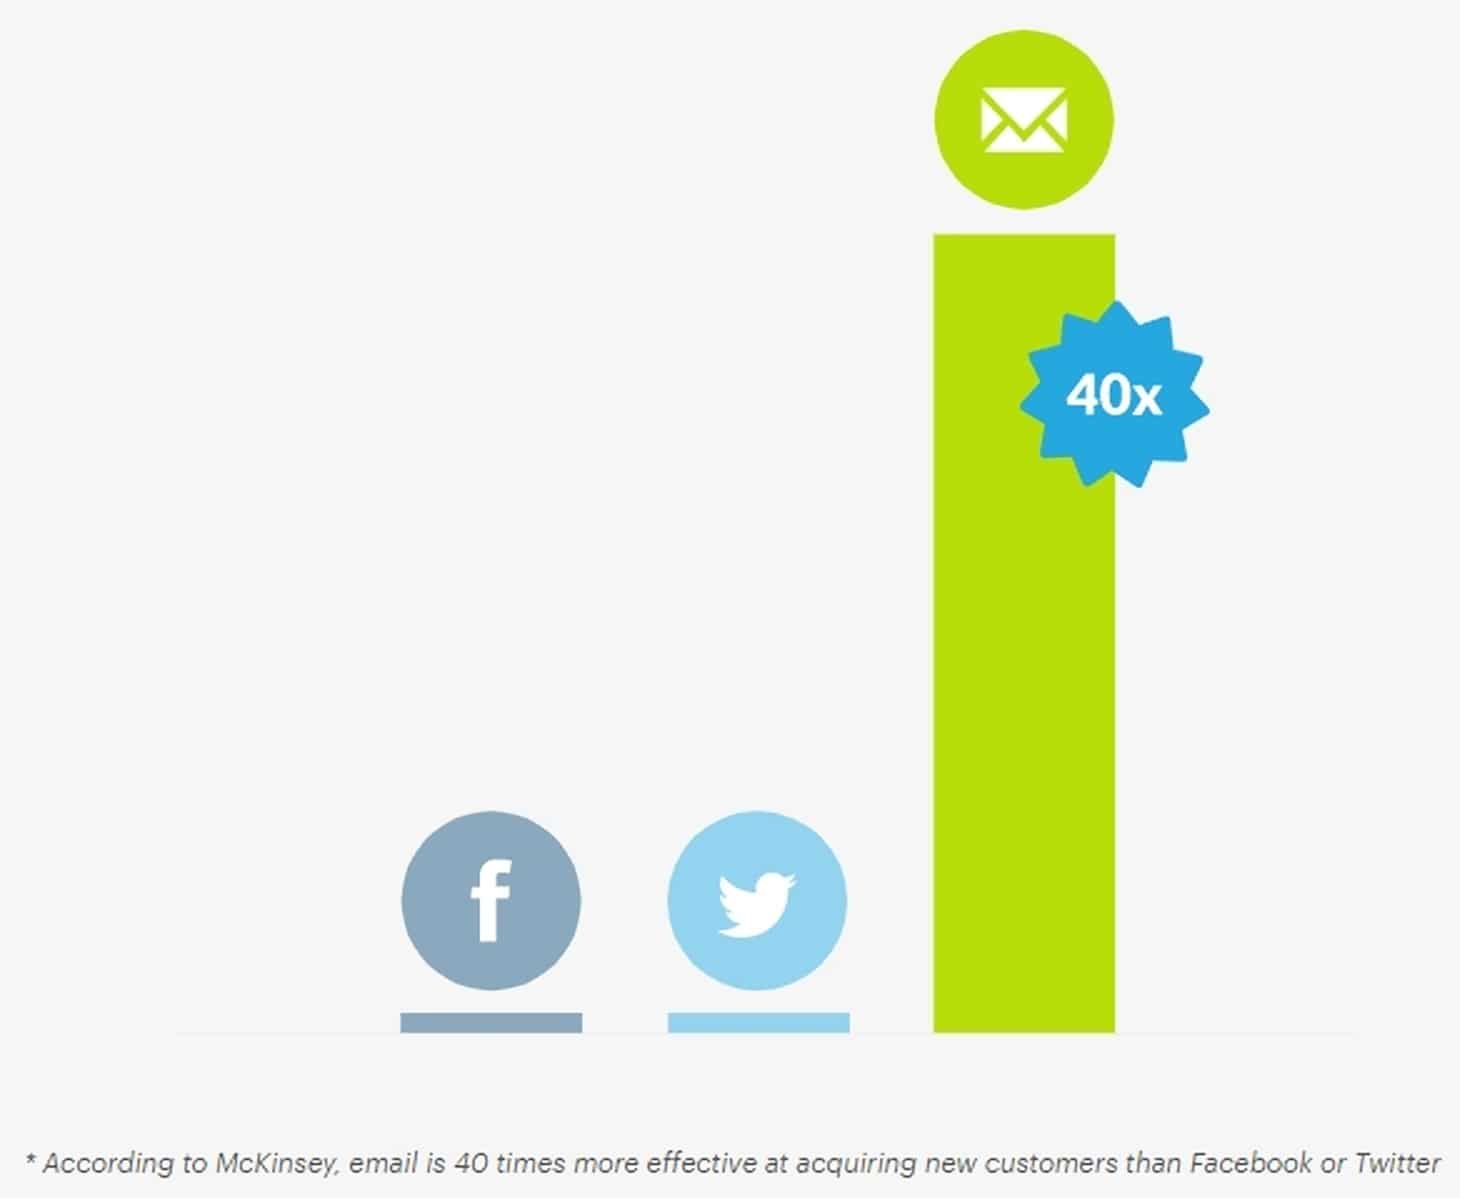 Email beats social by 40 times for customer acquisition.